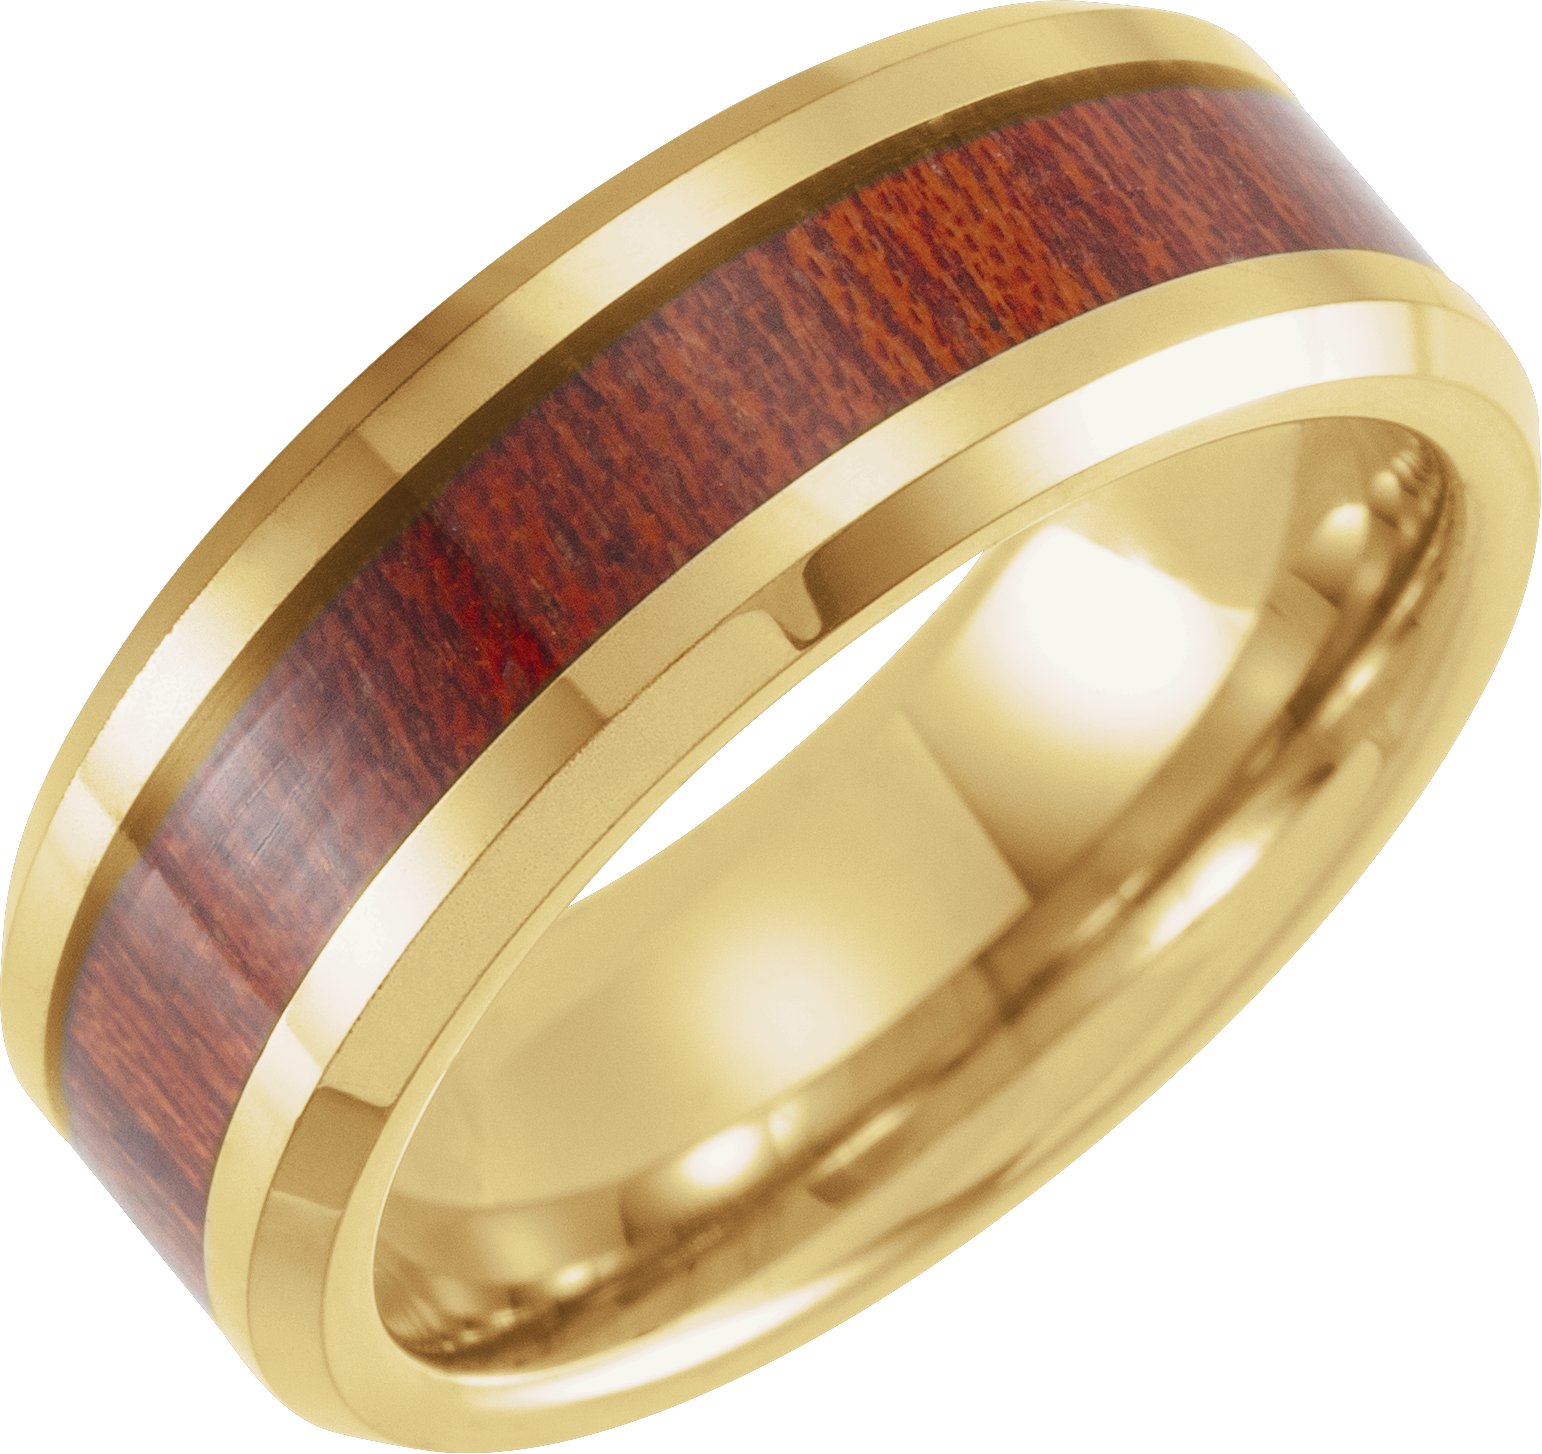 18K Yellow Gold PVD Tungsten 8 mm Beveled Band with Walnut Wood Inlay Size 7.5